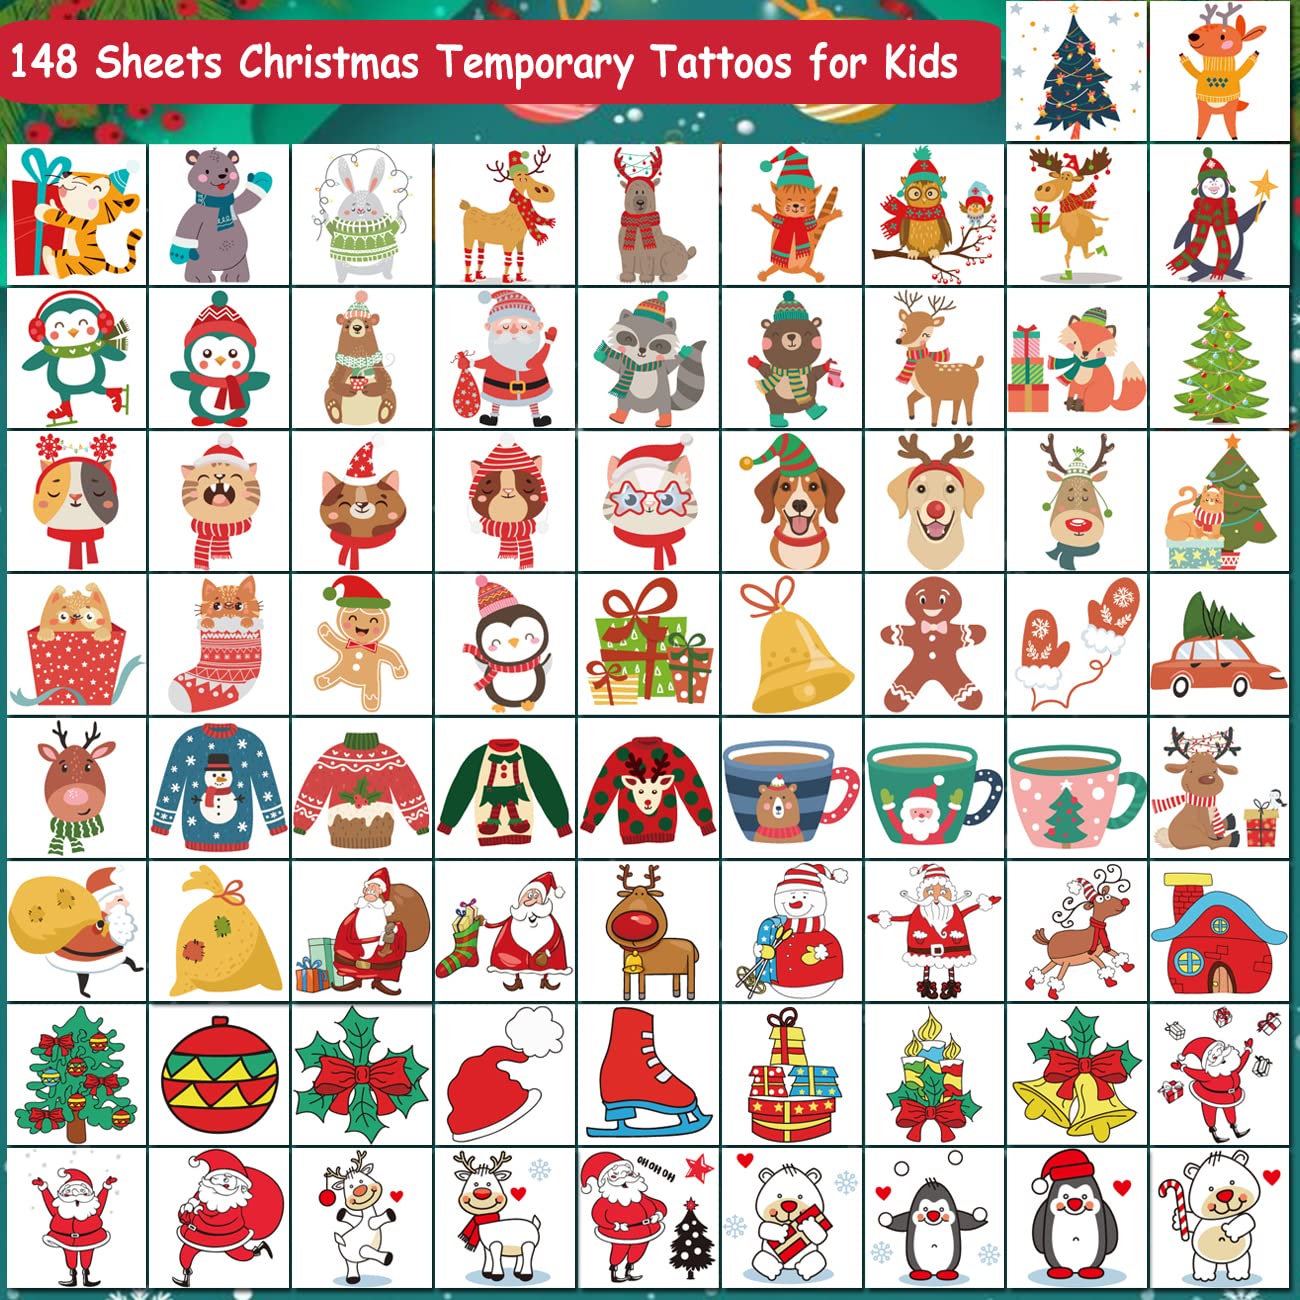 CHARLENT 148 PCS Christmas Temporary Tattoos for Kids - Xmas Individual Tattoos for Kids Christmas Party Favors, Stocking Stuffer, Christmas Eve Gift